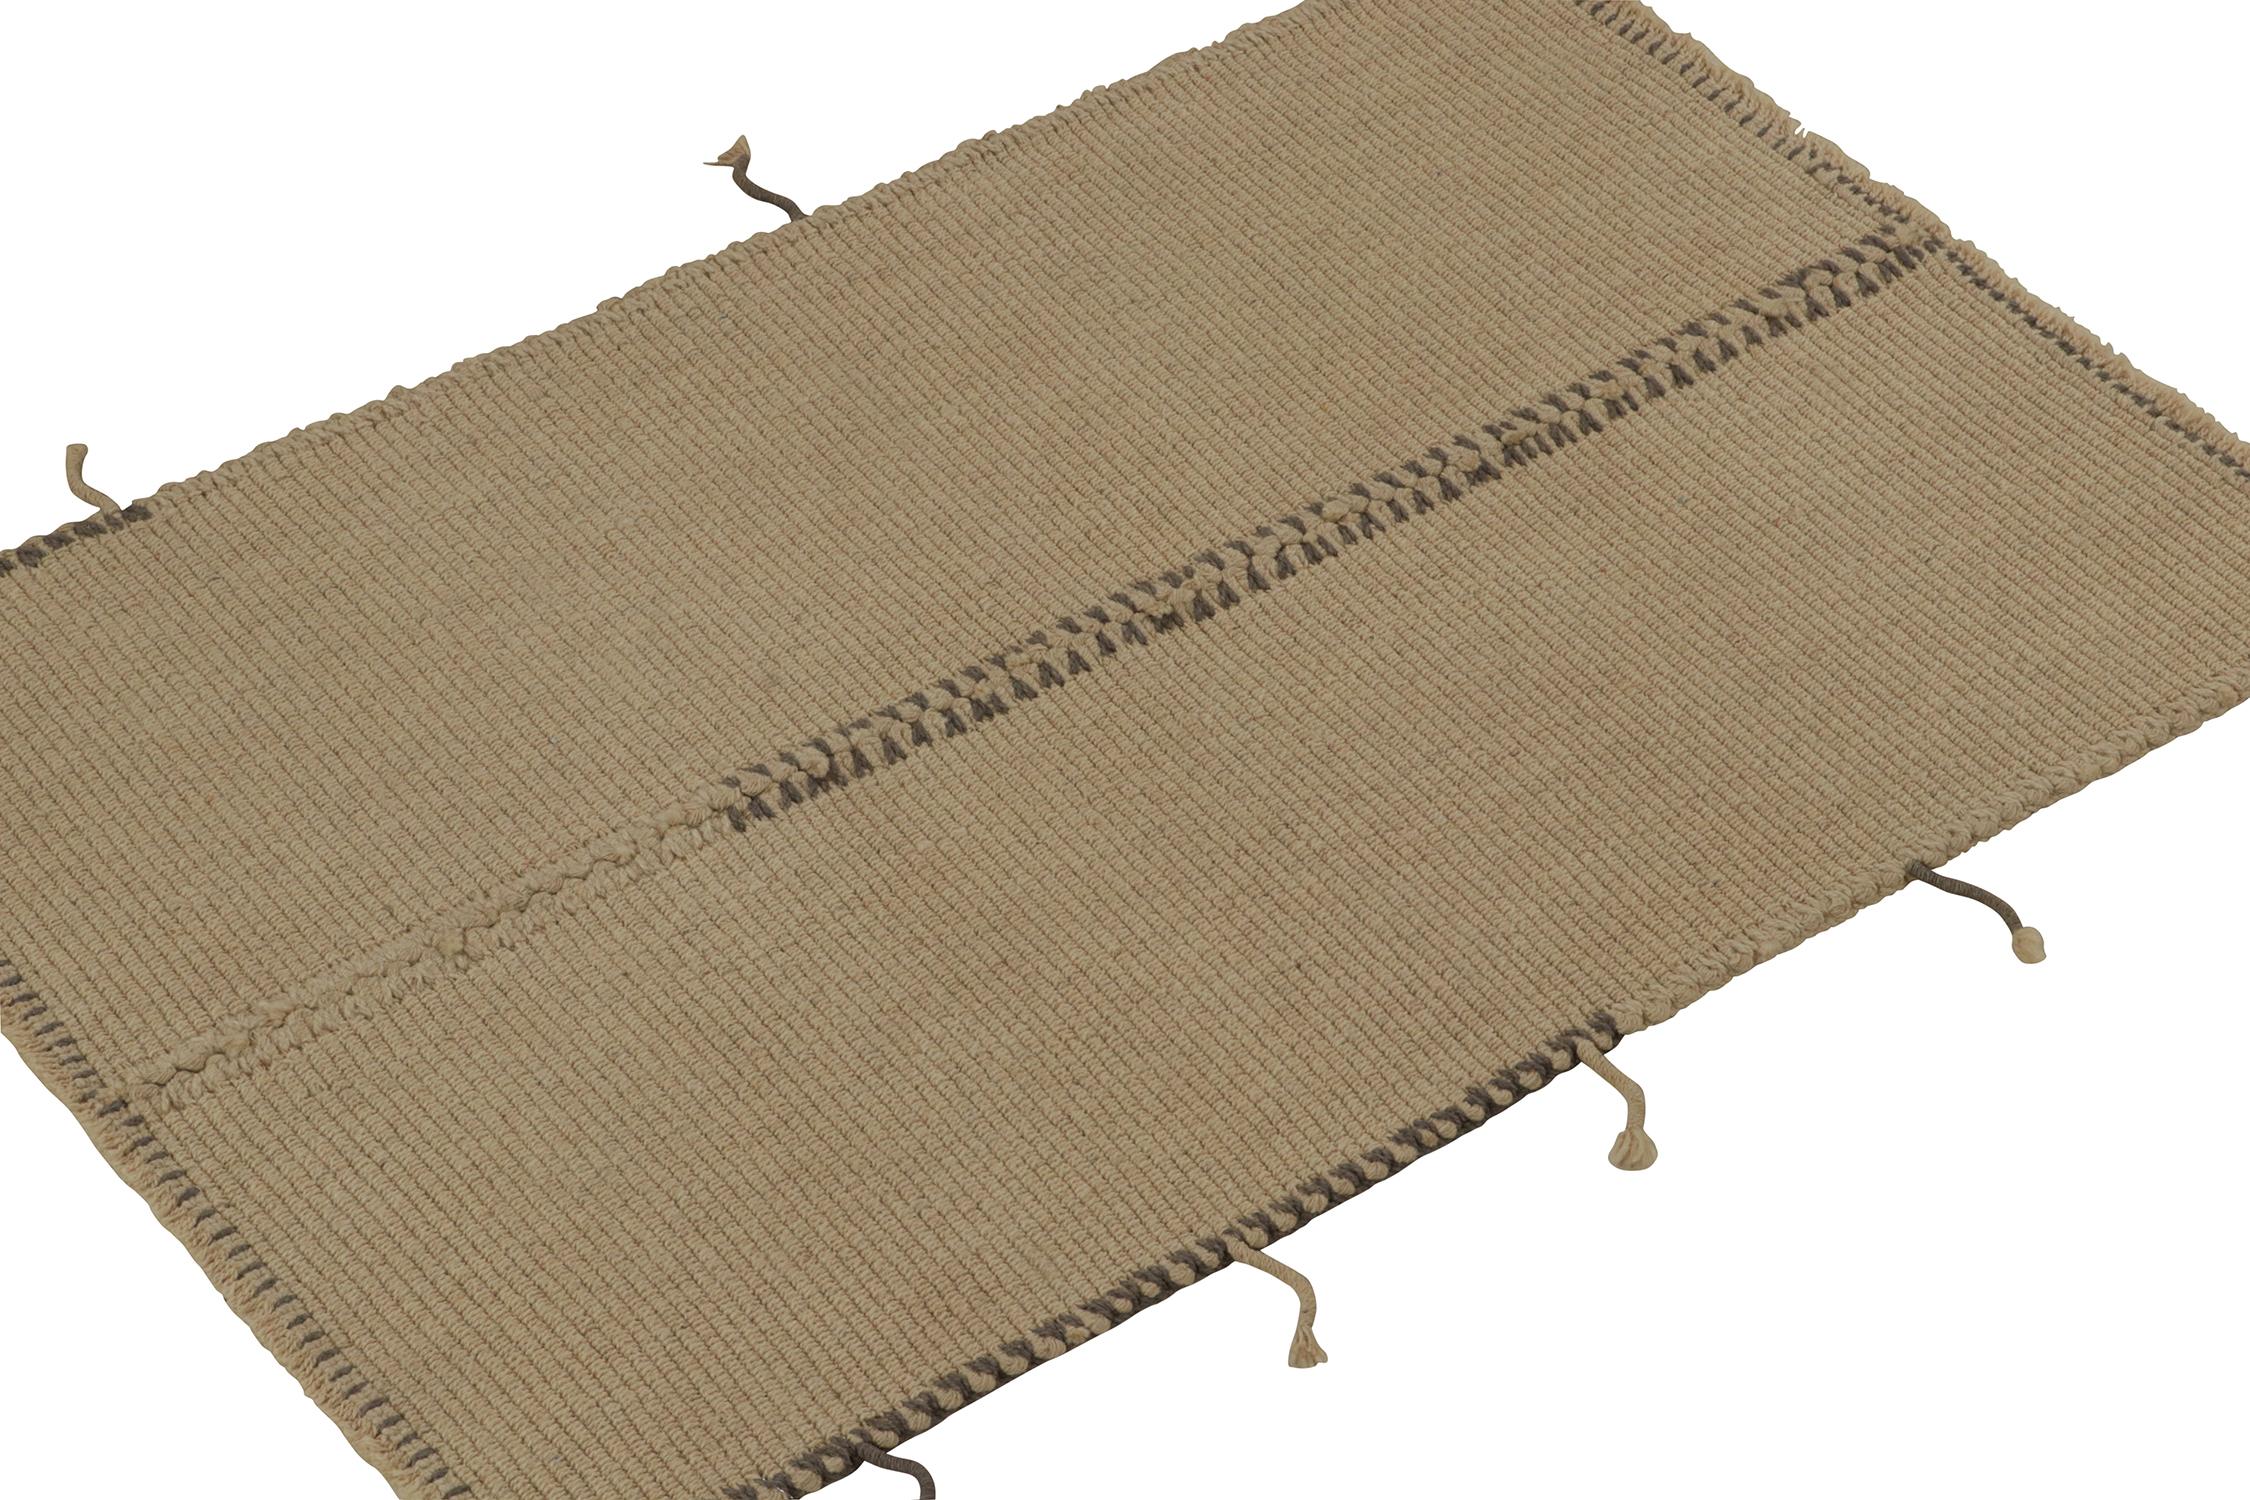 Handwoven in wool, a gift-sized 3x4 Kilim from an innovative new contemporary flat weave collection by Rug & Kilim.

On the Design: The “Rez Kilim” connotes a modern take on classic panel weaving—this edition enjoying warm beige-brown with gray